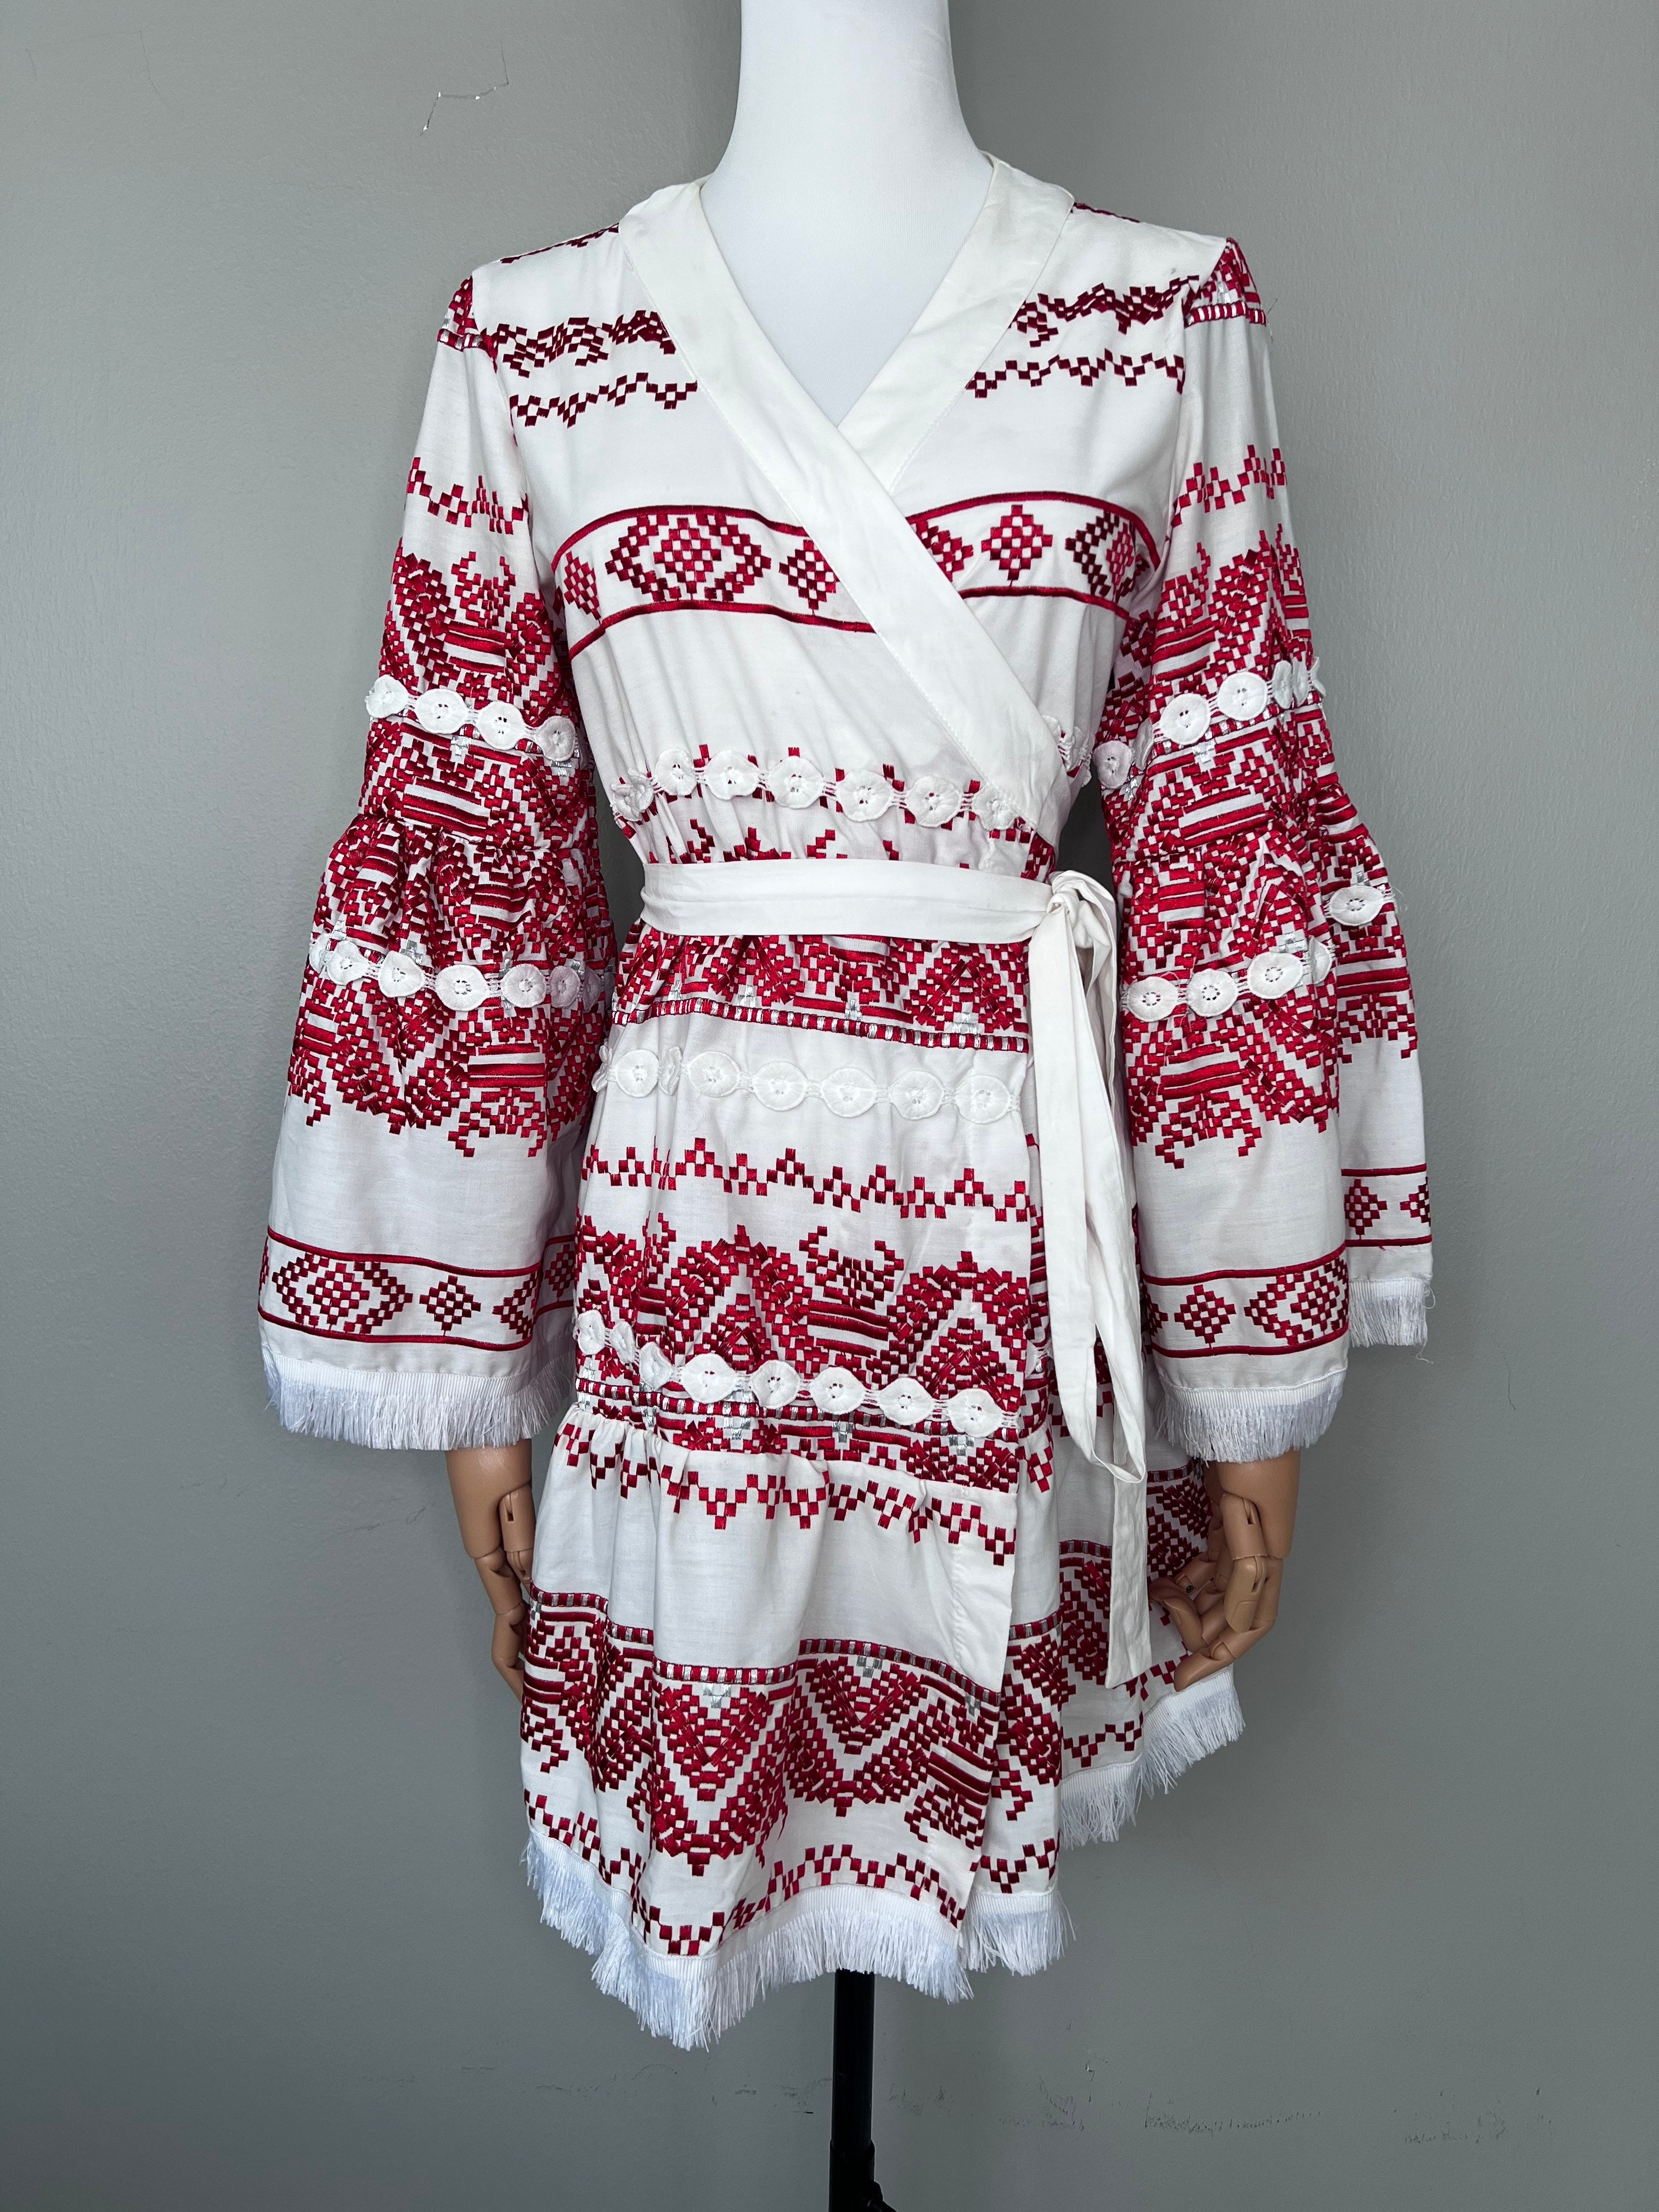 White wrap up dress with red stitching